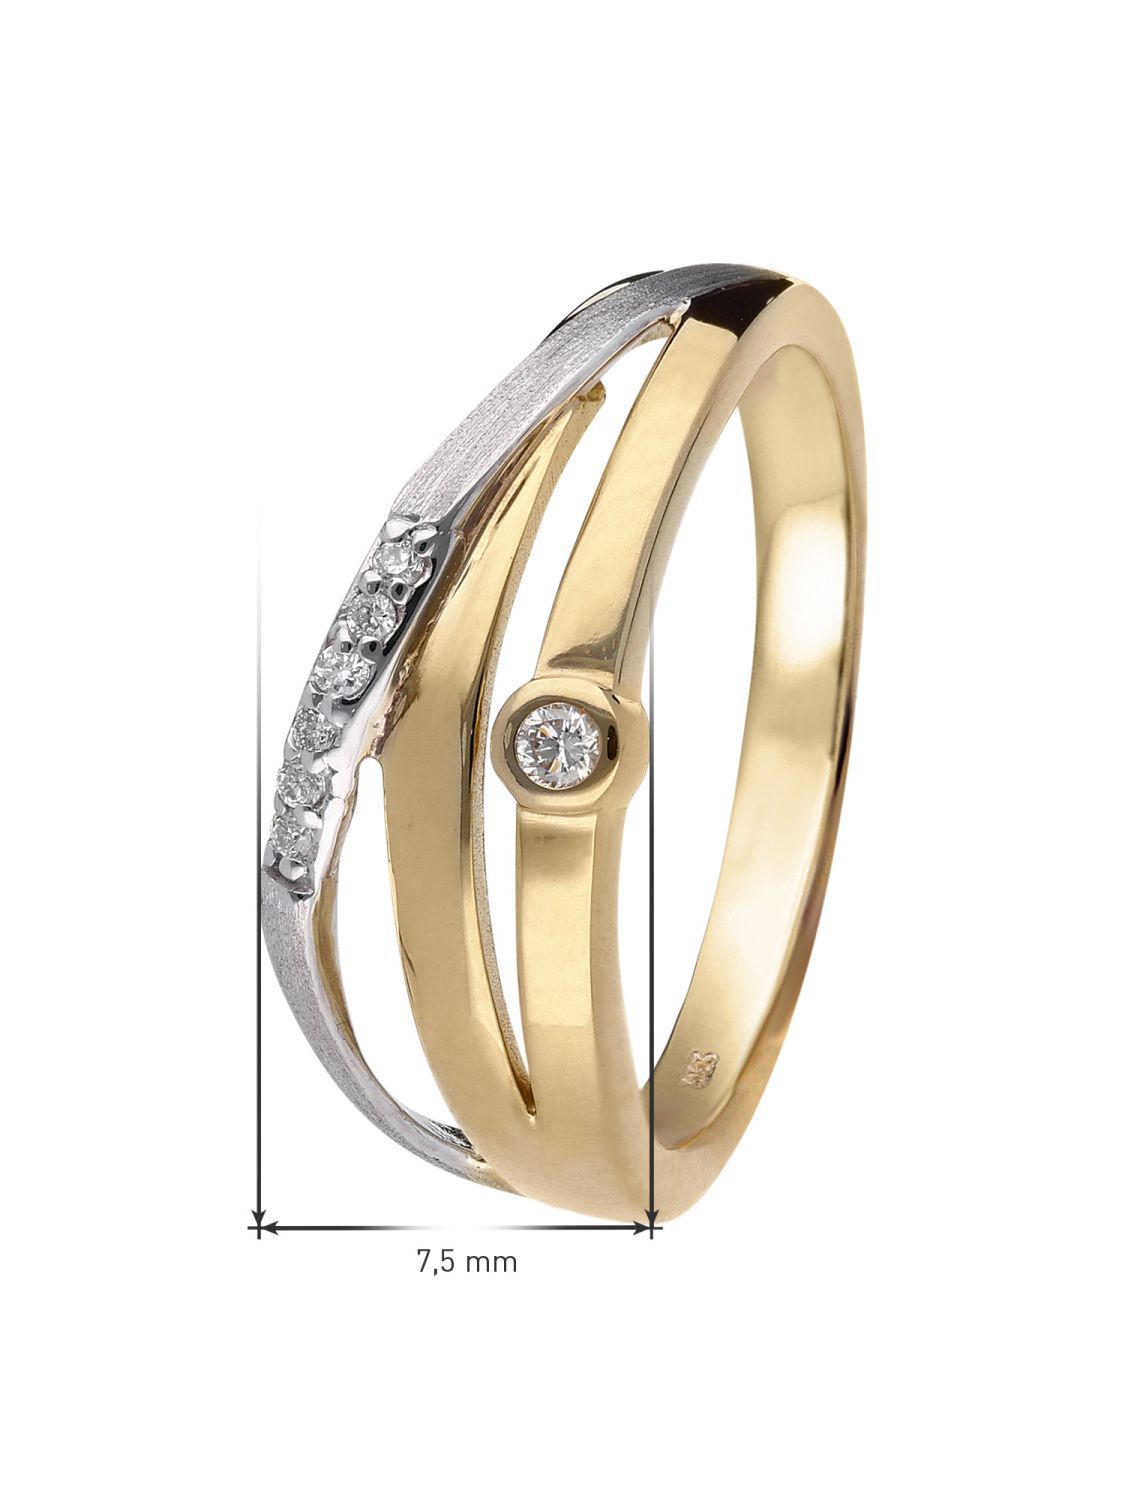 uhrcenter Diamonds 333/8K Gold with Ring Ladies\' • Two-Tone 15577 trendor